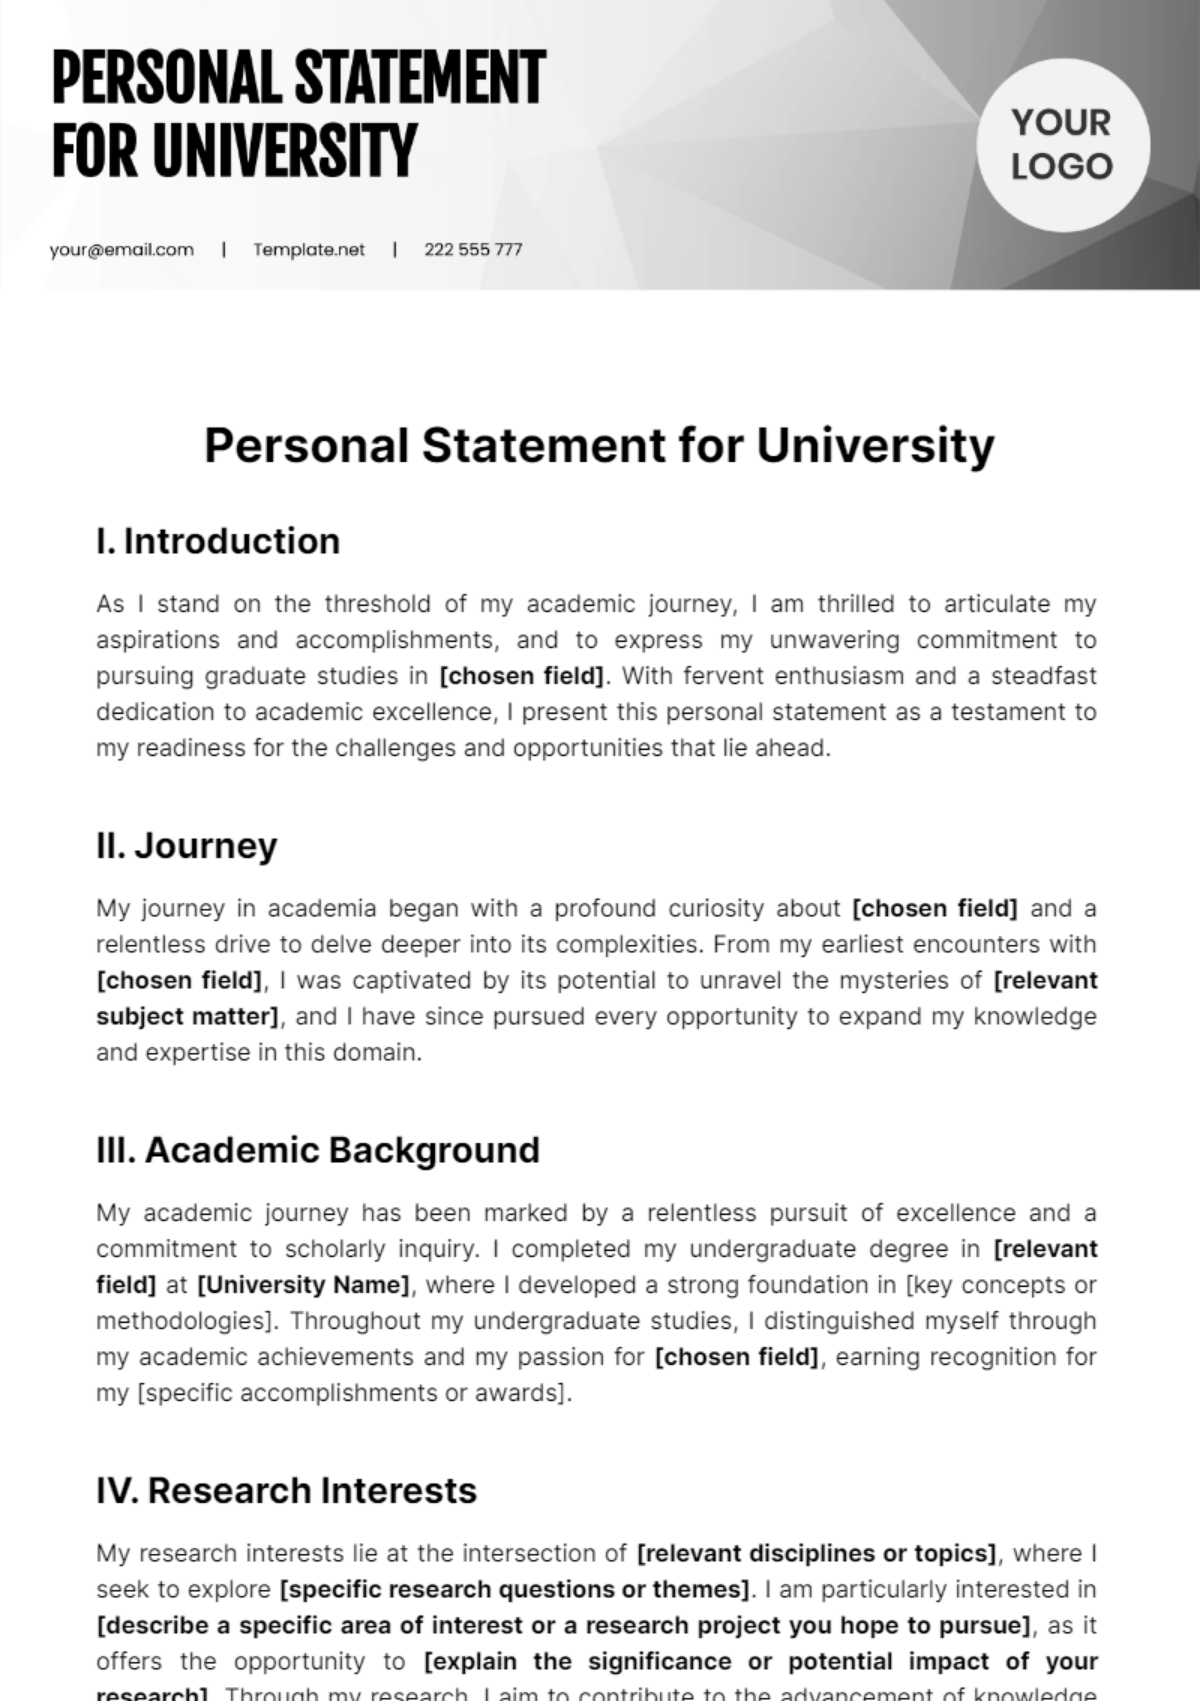 Personal Statement for University Template